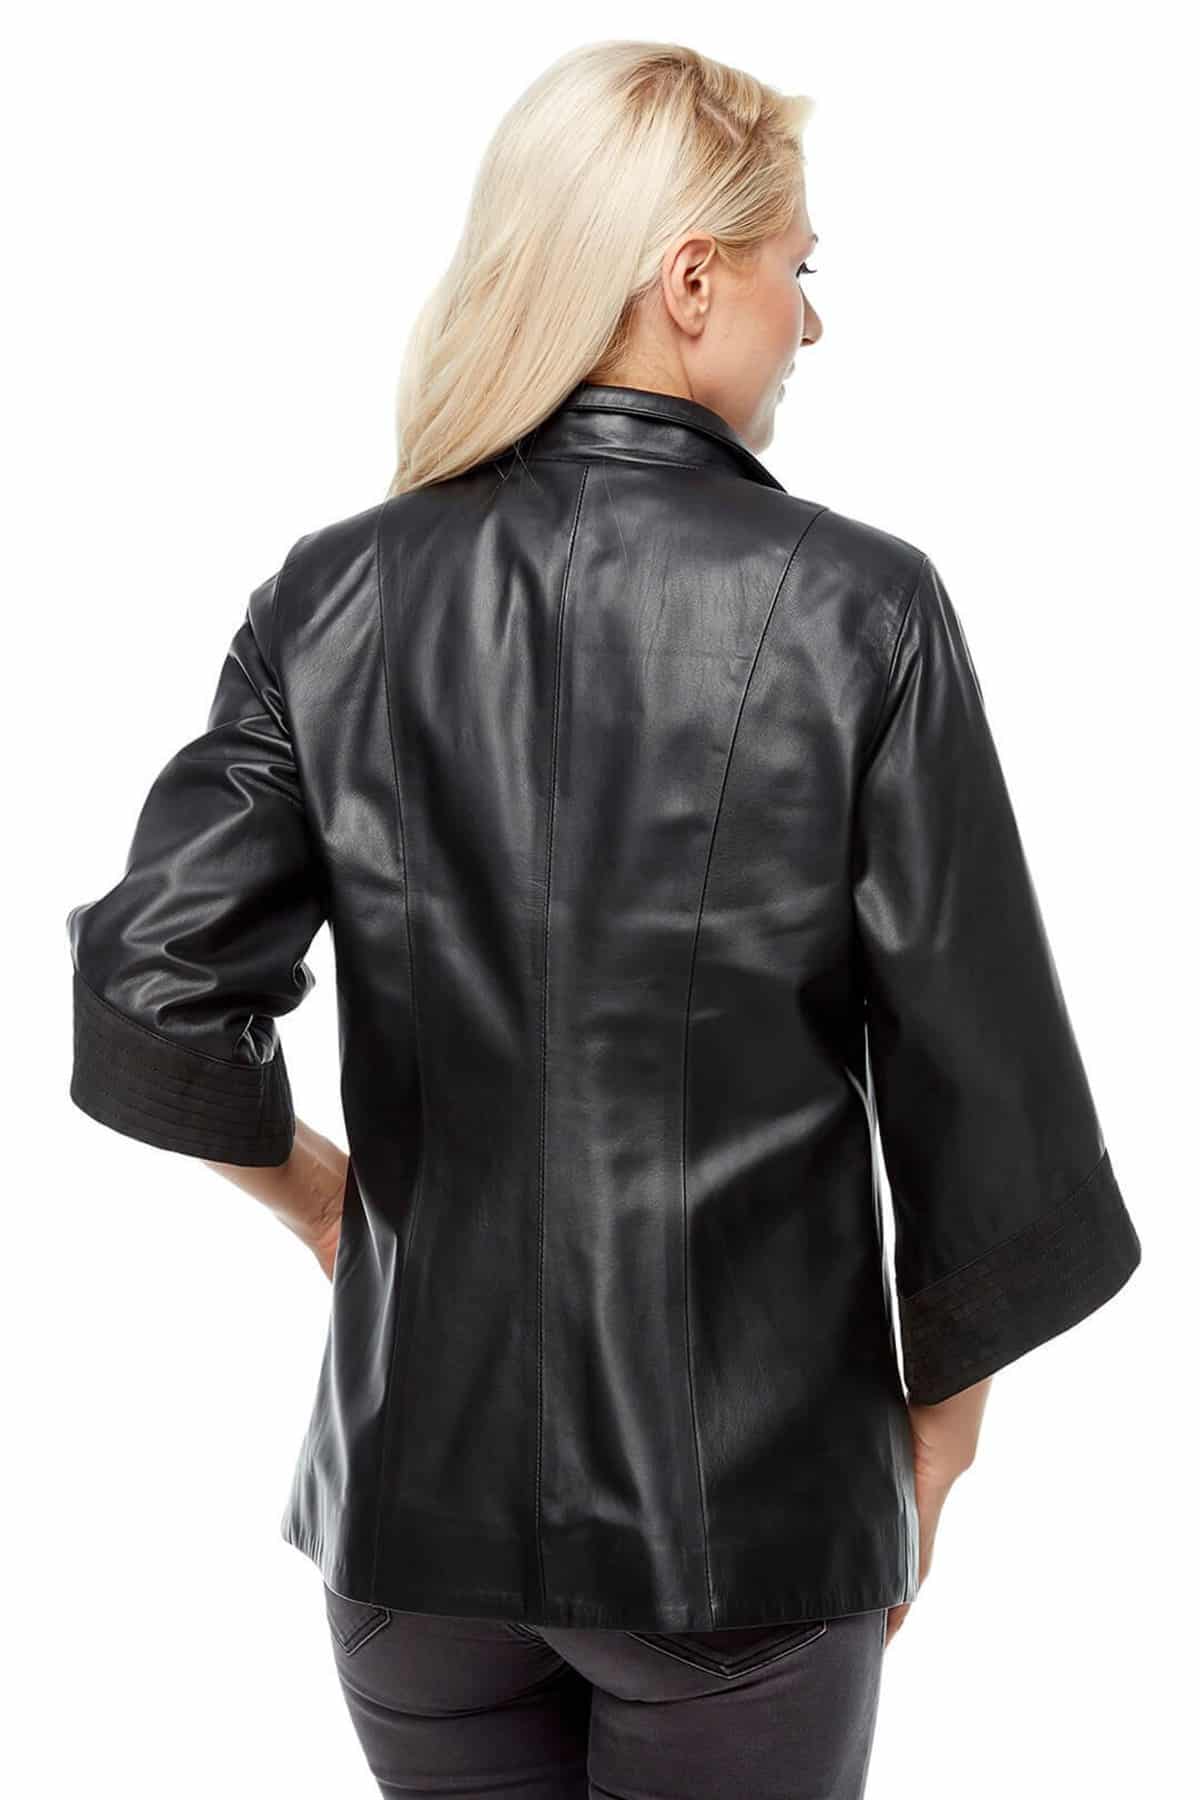 Baggy Black Leather Coat For Women’s2